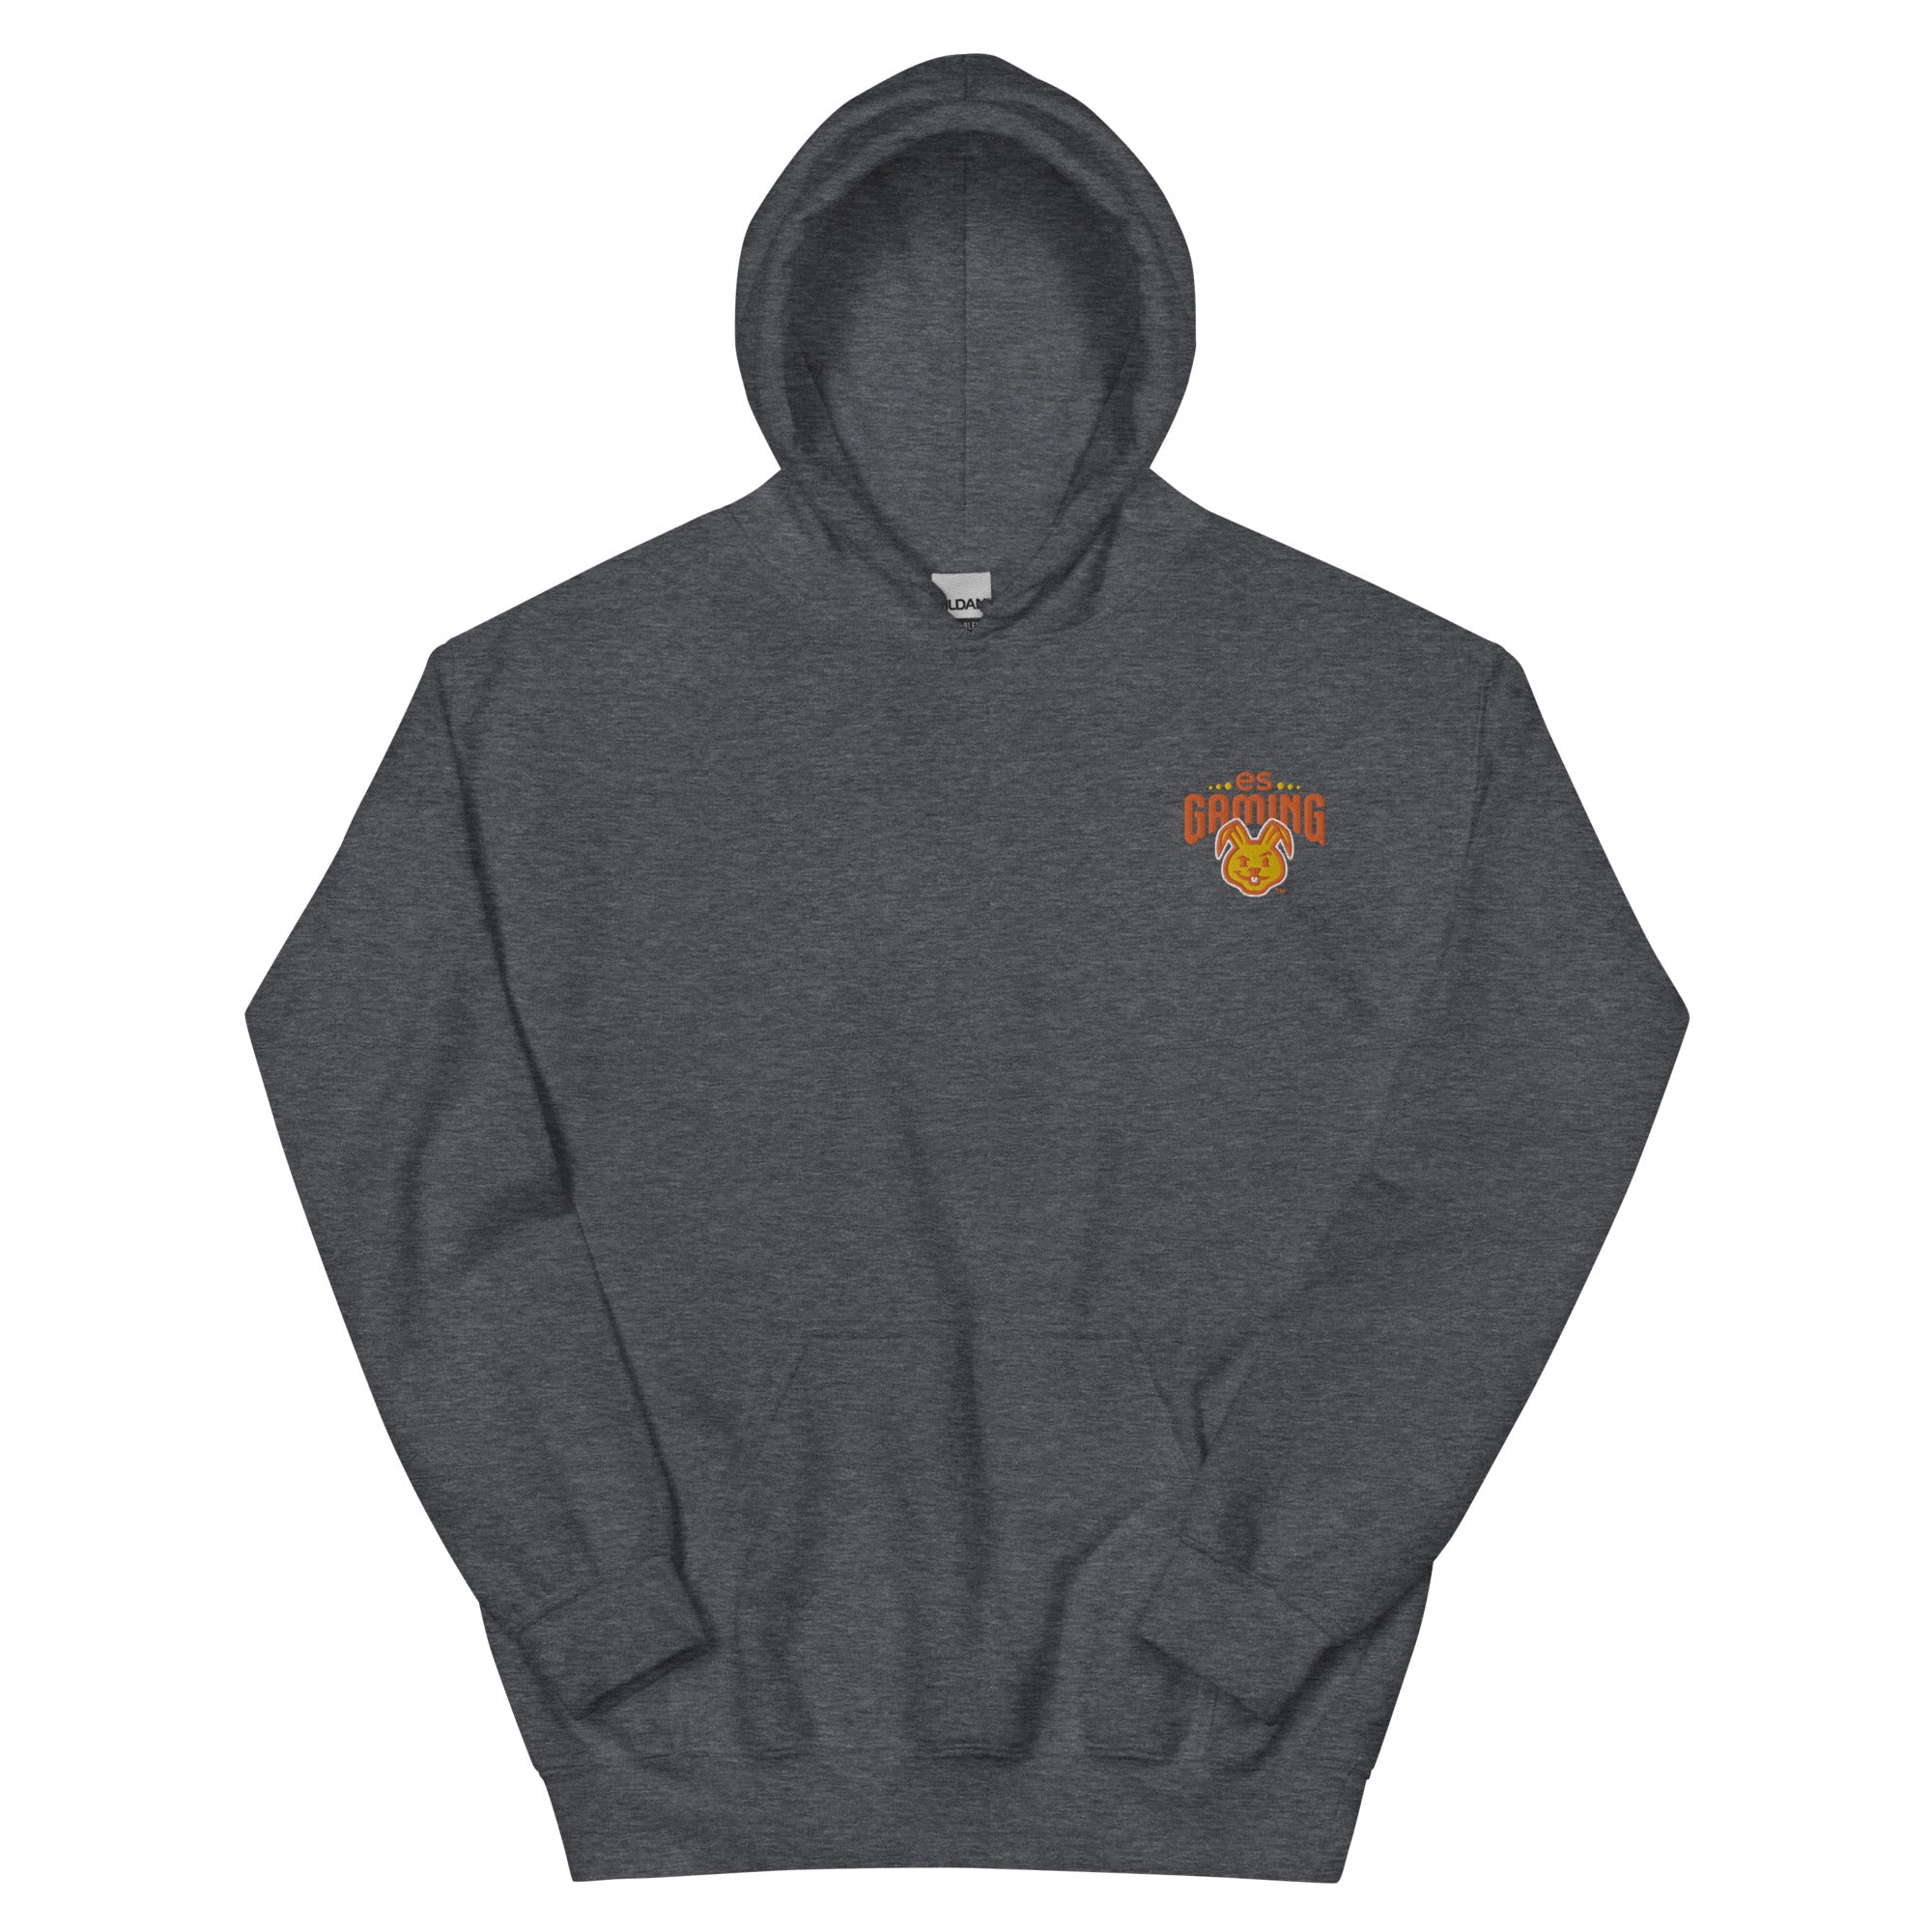 Easterseals | On Demand | Embroidered Unisex Hoodie